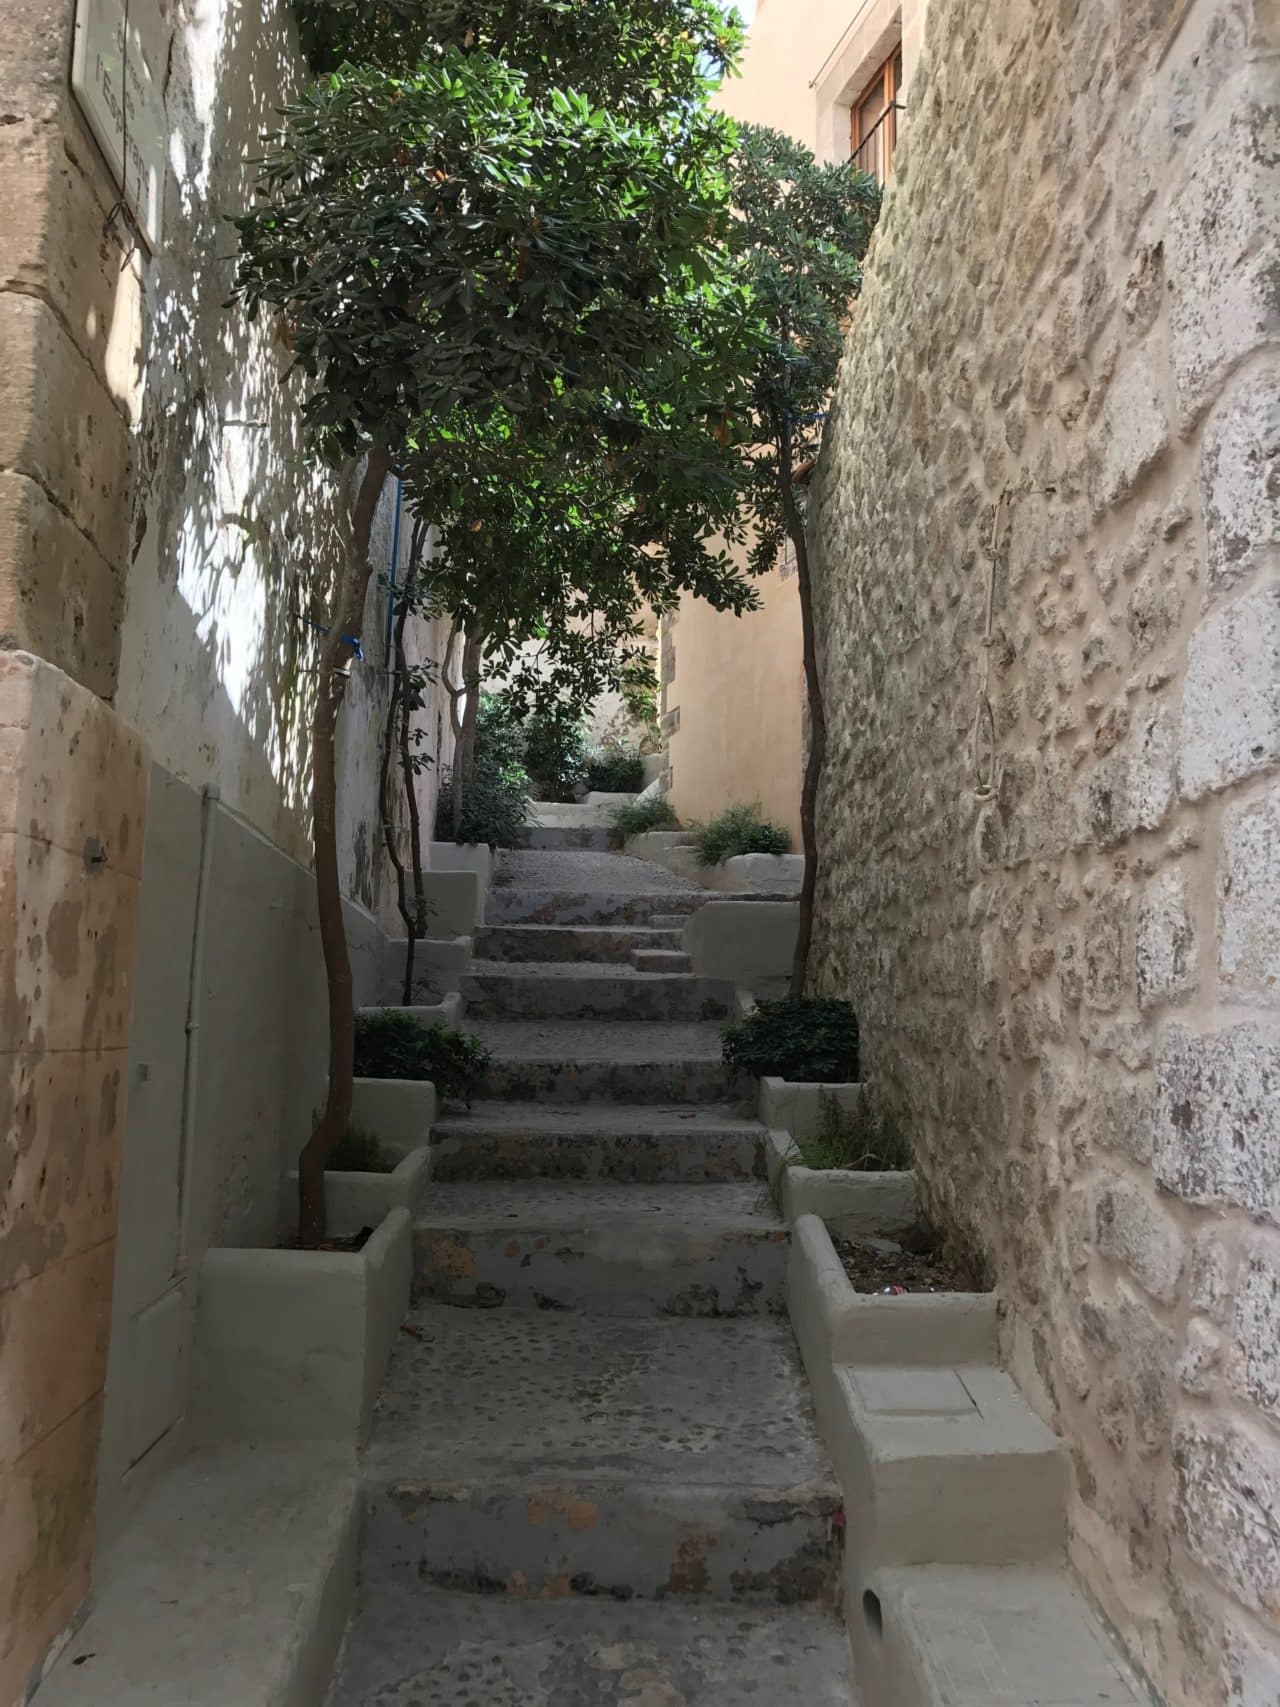 Narrow Stone Stair Alley With Small Trees